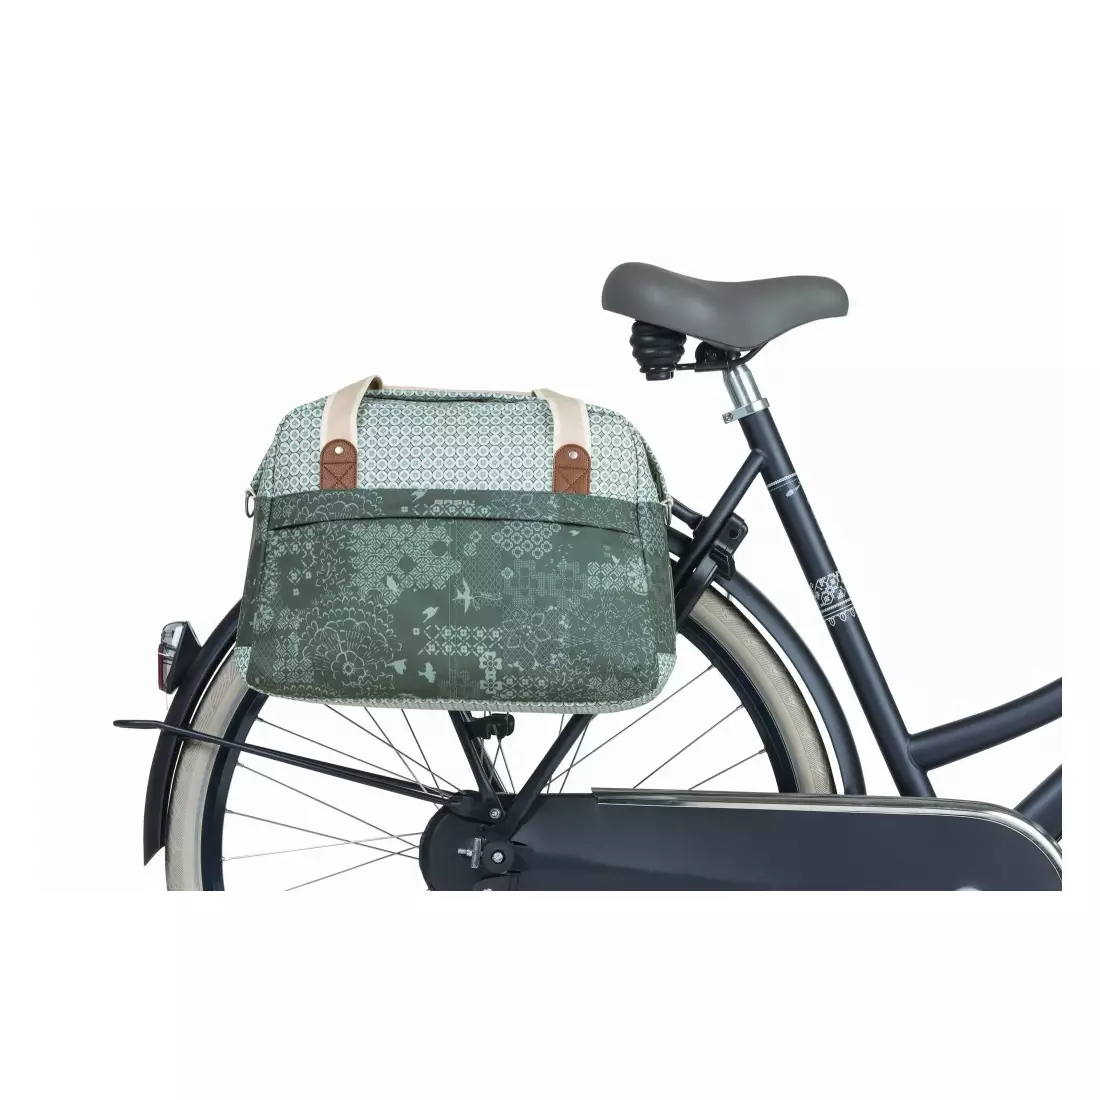 BASIL bag / pannier for the trunk boheme carry all 18L forest green B-18006